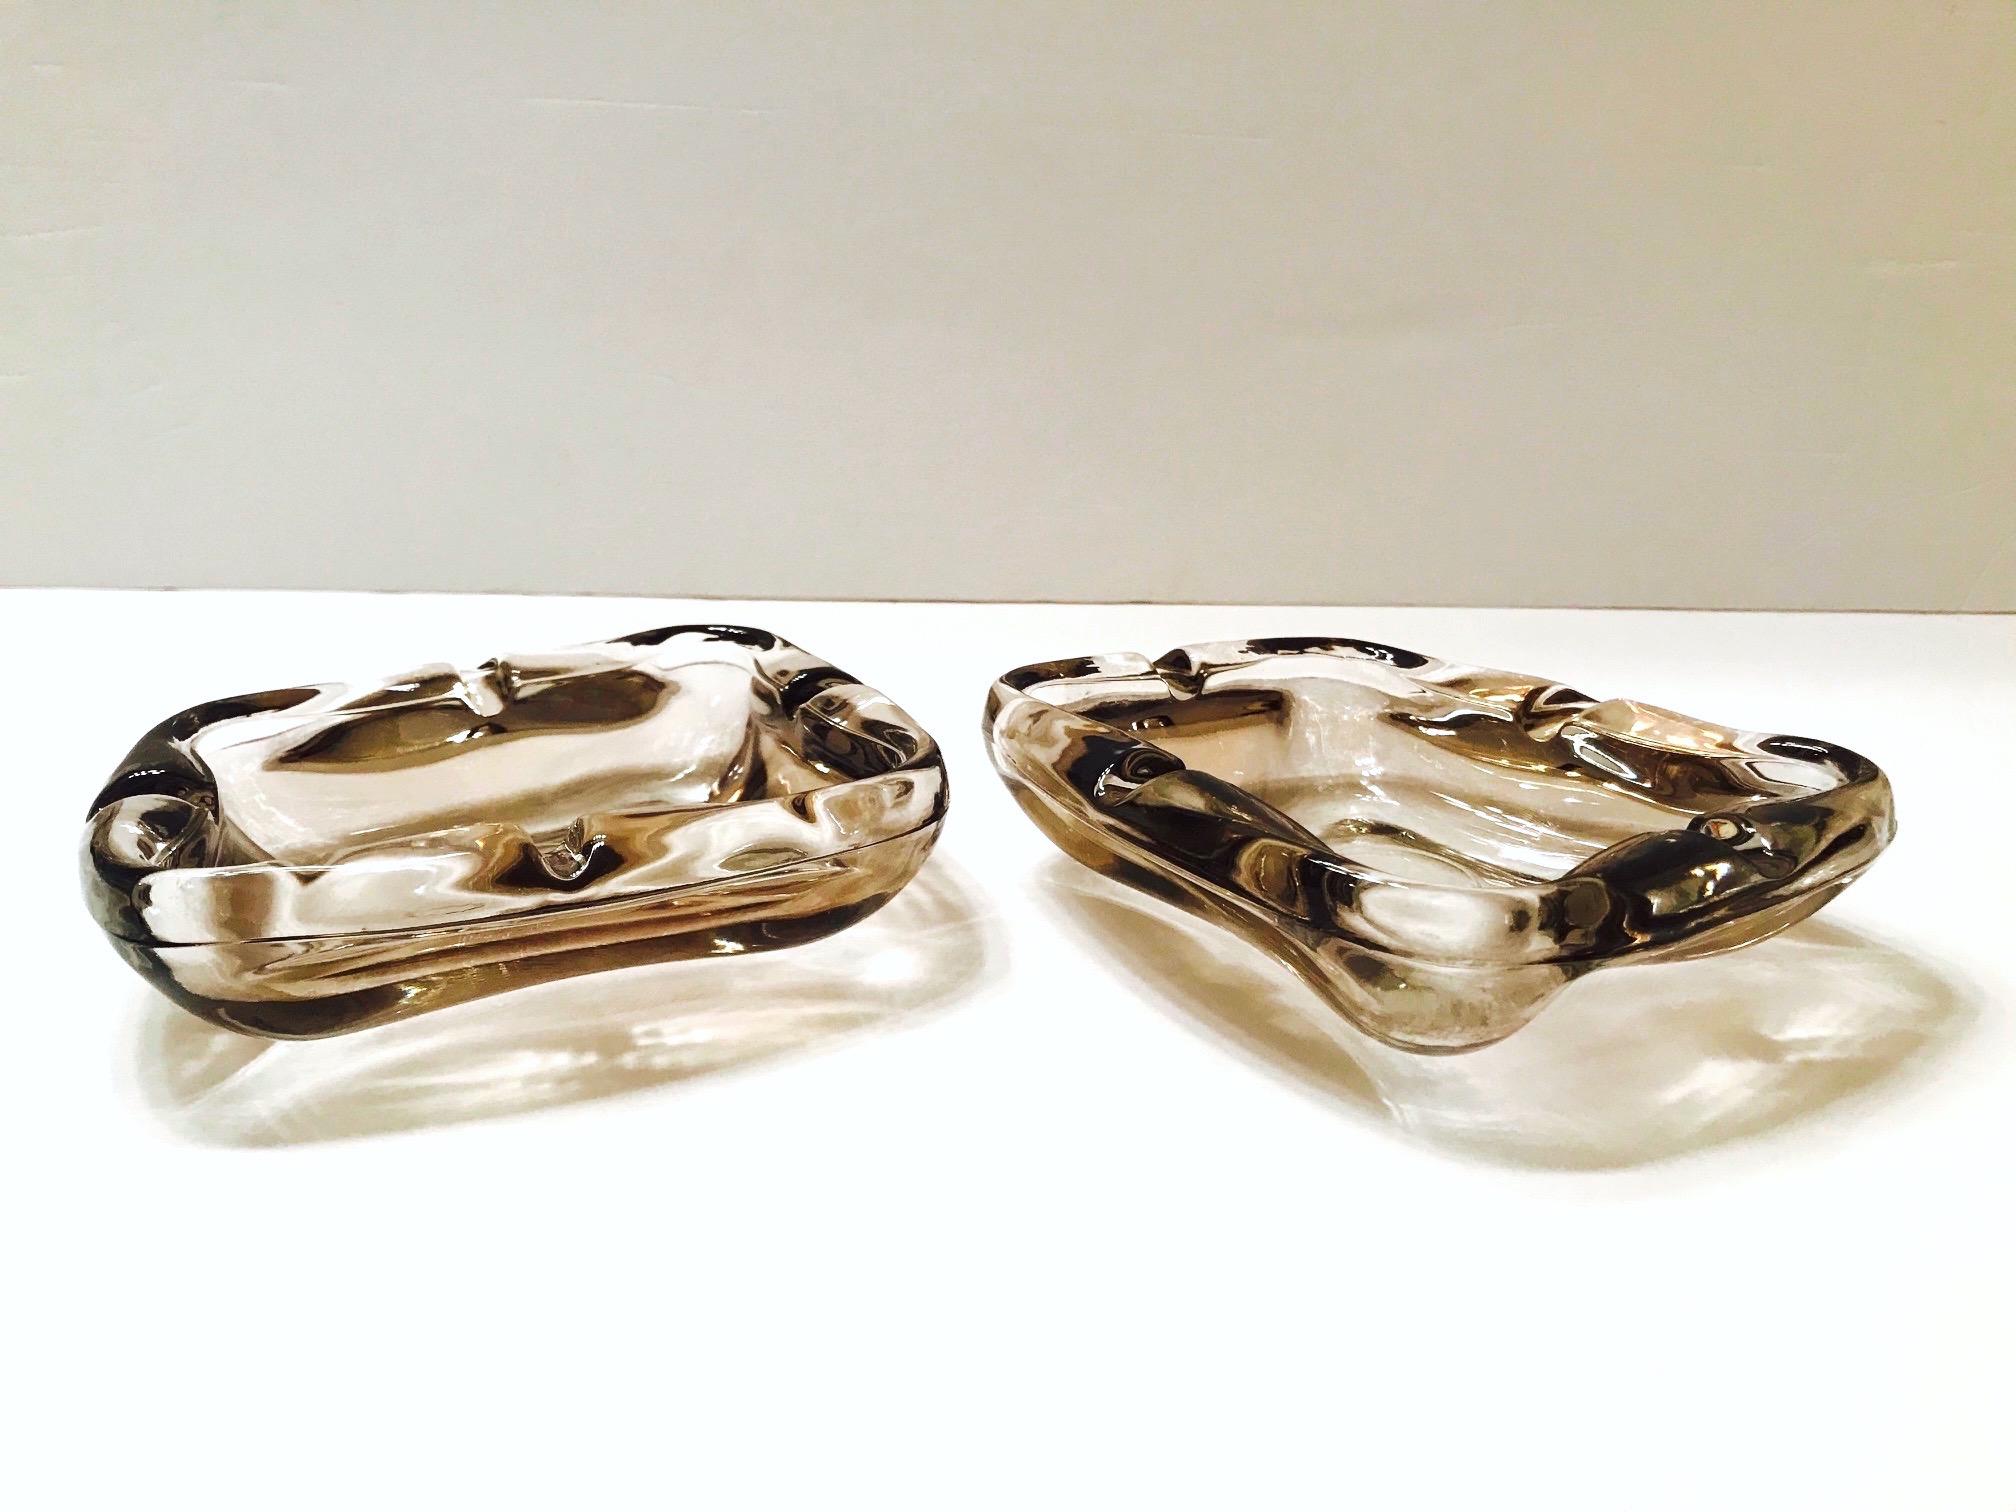 Pair of Mid-Century Modern cast glass ashtrays with organic freeform design. Smoked glass in gradient hues of brown or gray depending on the surrounding light. Each ashtray is identical in scale and features four notches fitted for cigarettes.